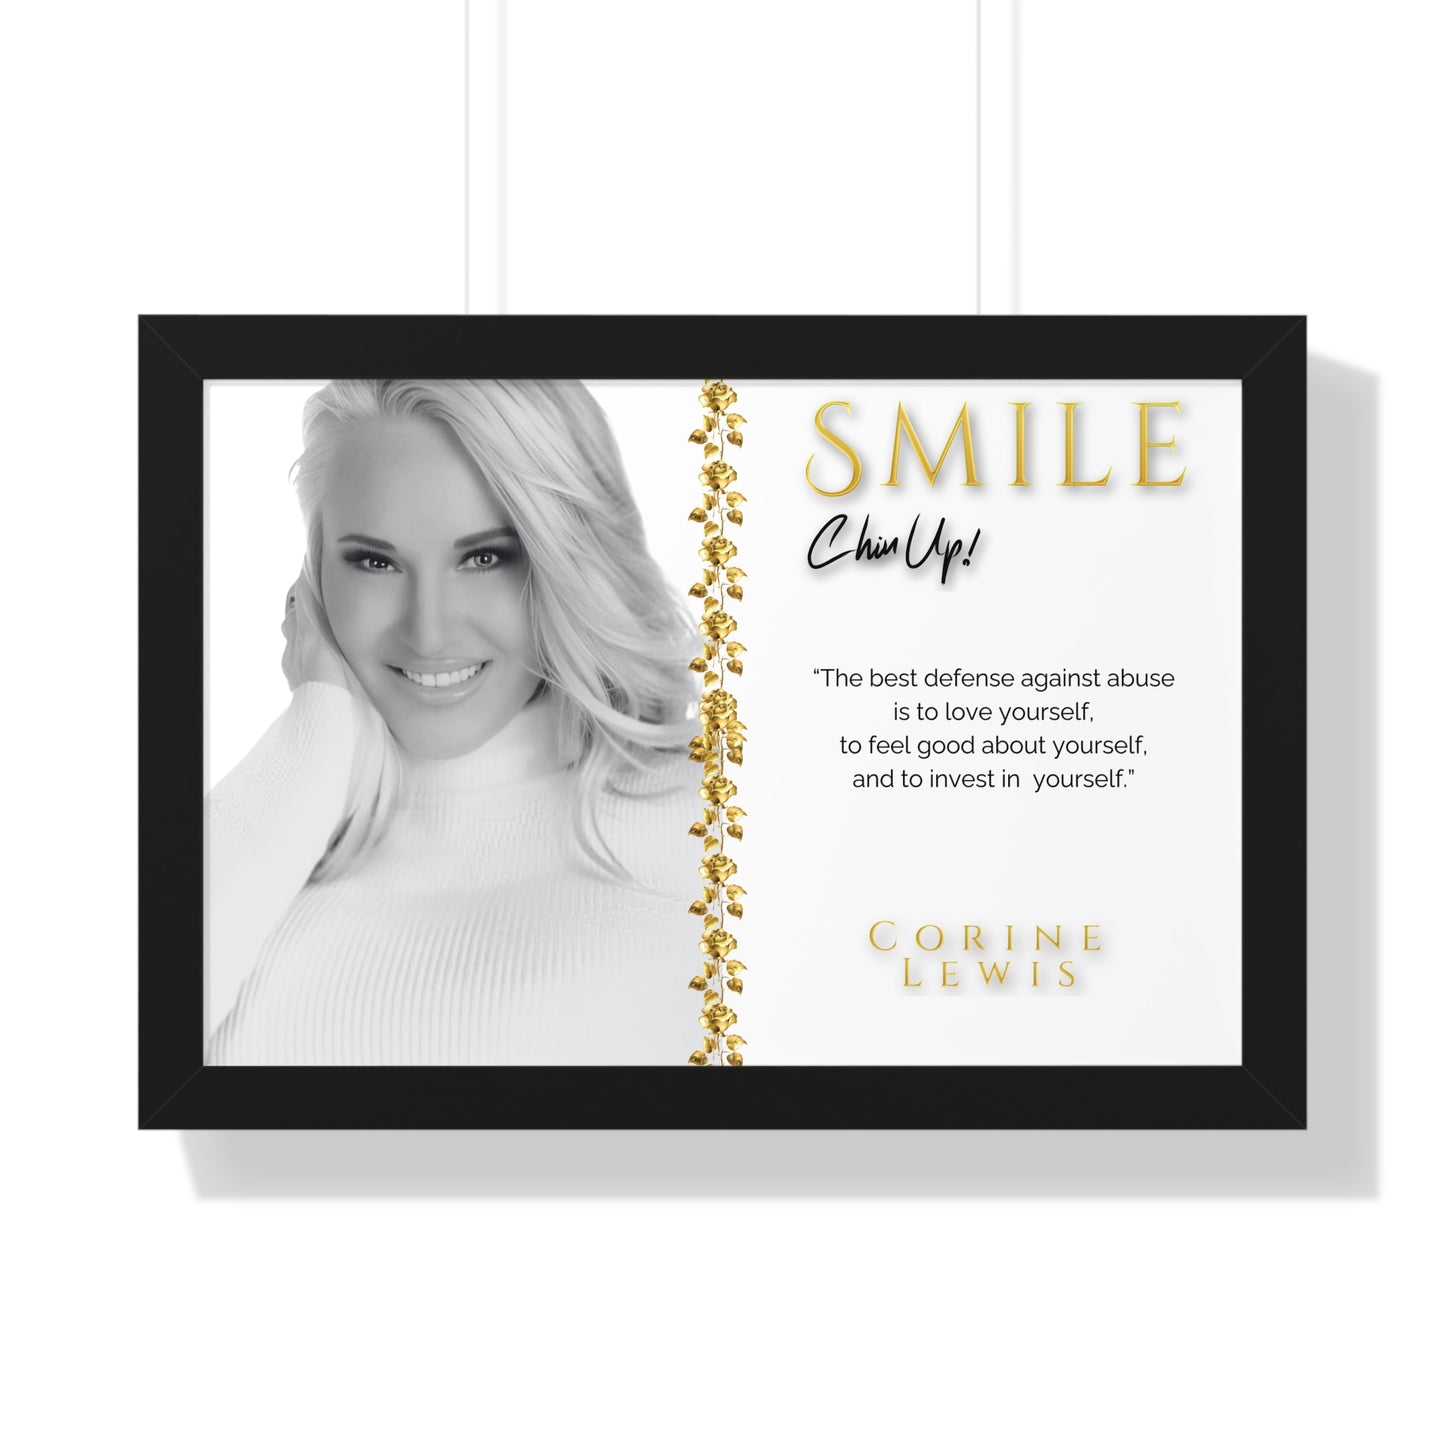 SMILE, Chin Up! Framed Collectors Edition Poster